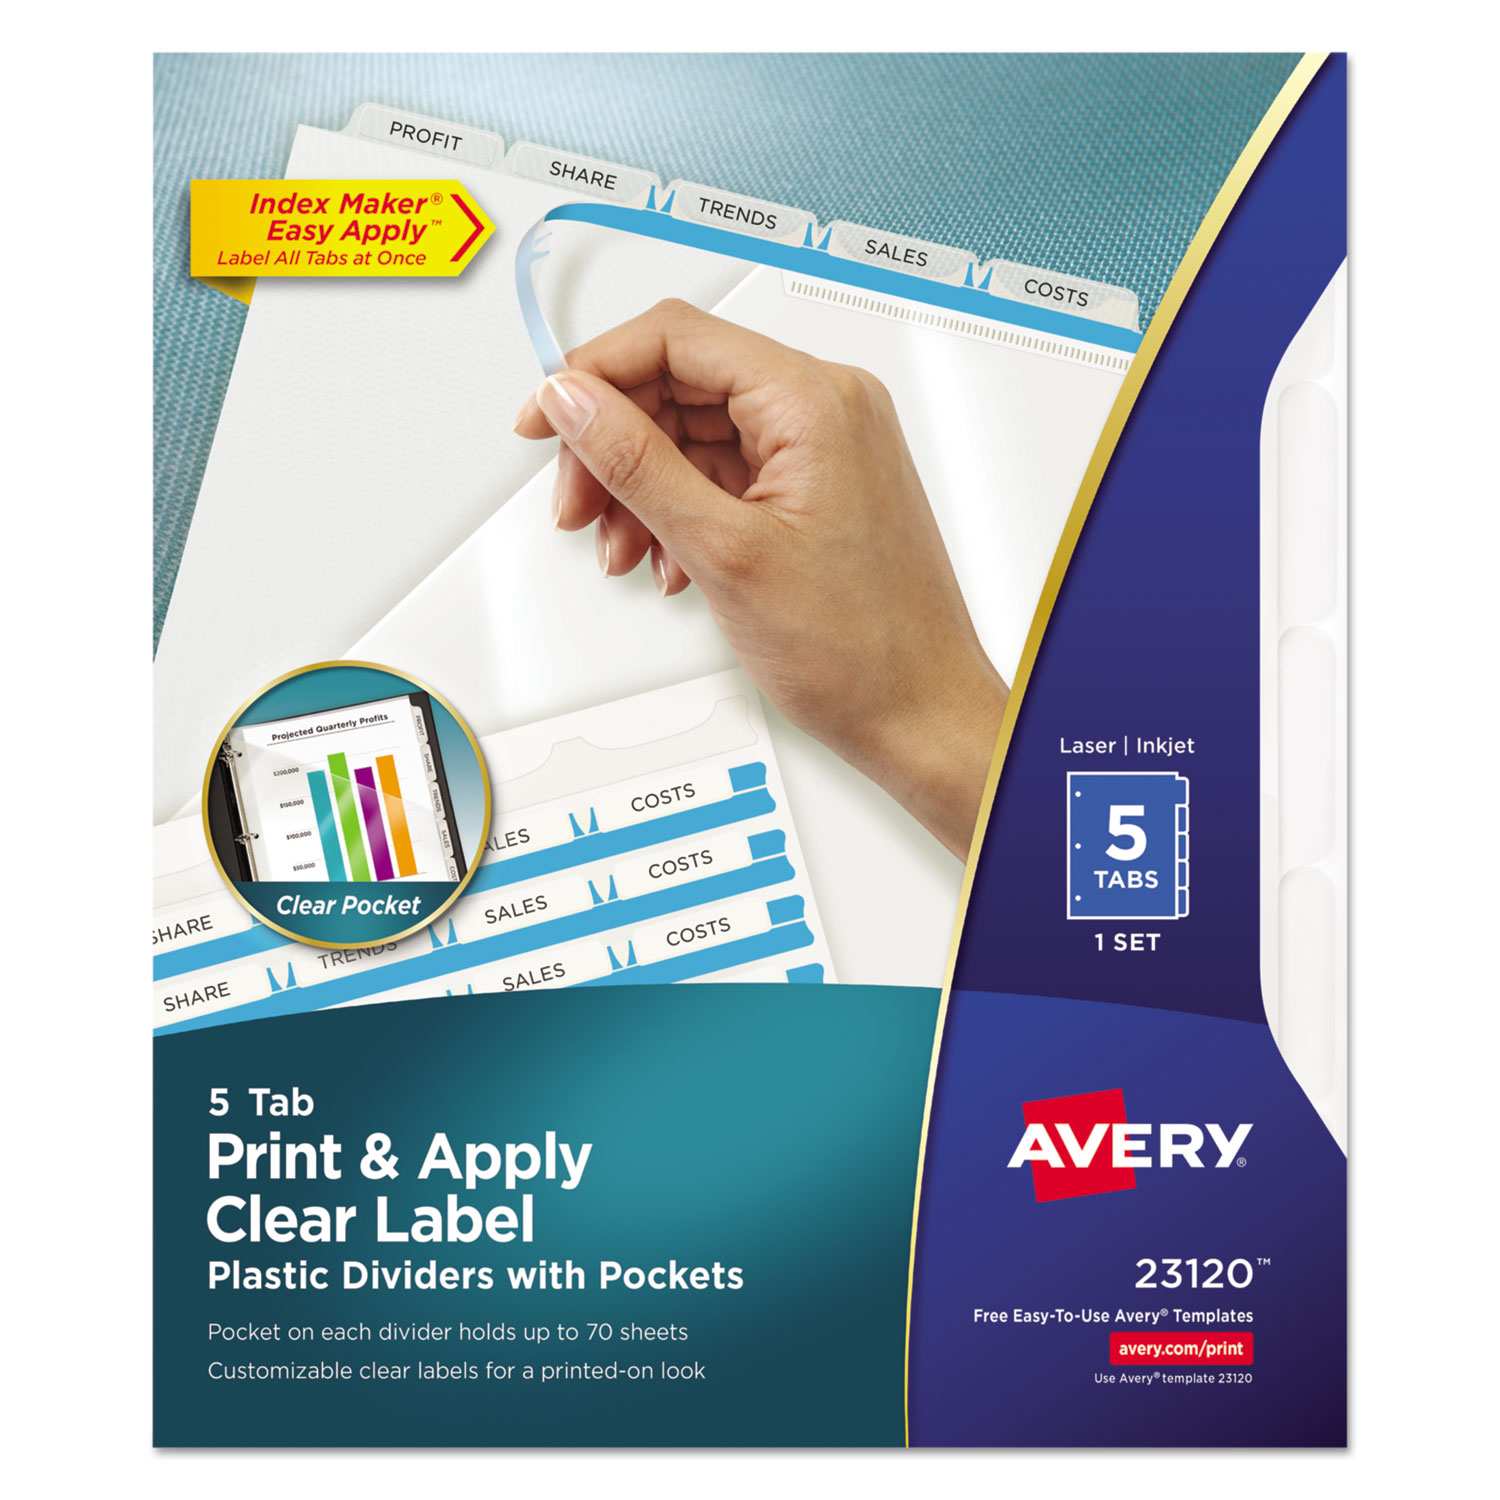  Avery 23120 Print/Apply 1-Pocket Index Maker Clear Label Plastic Dividers with Printable Label Strip, 5-Tab, 11 x 8.5, Translucent, 1 Set (AVE23120) 